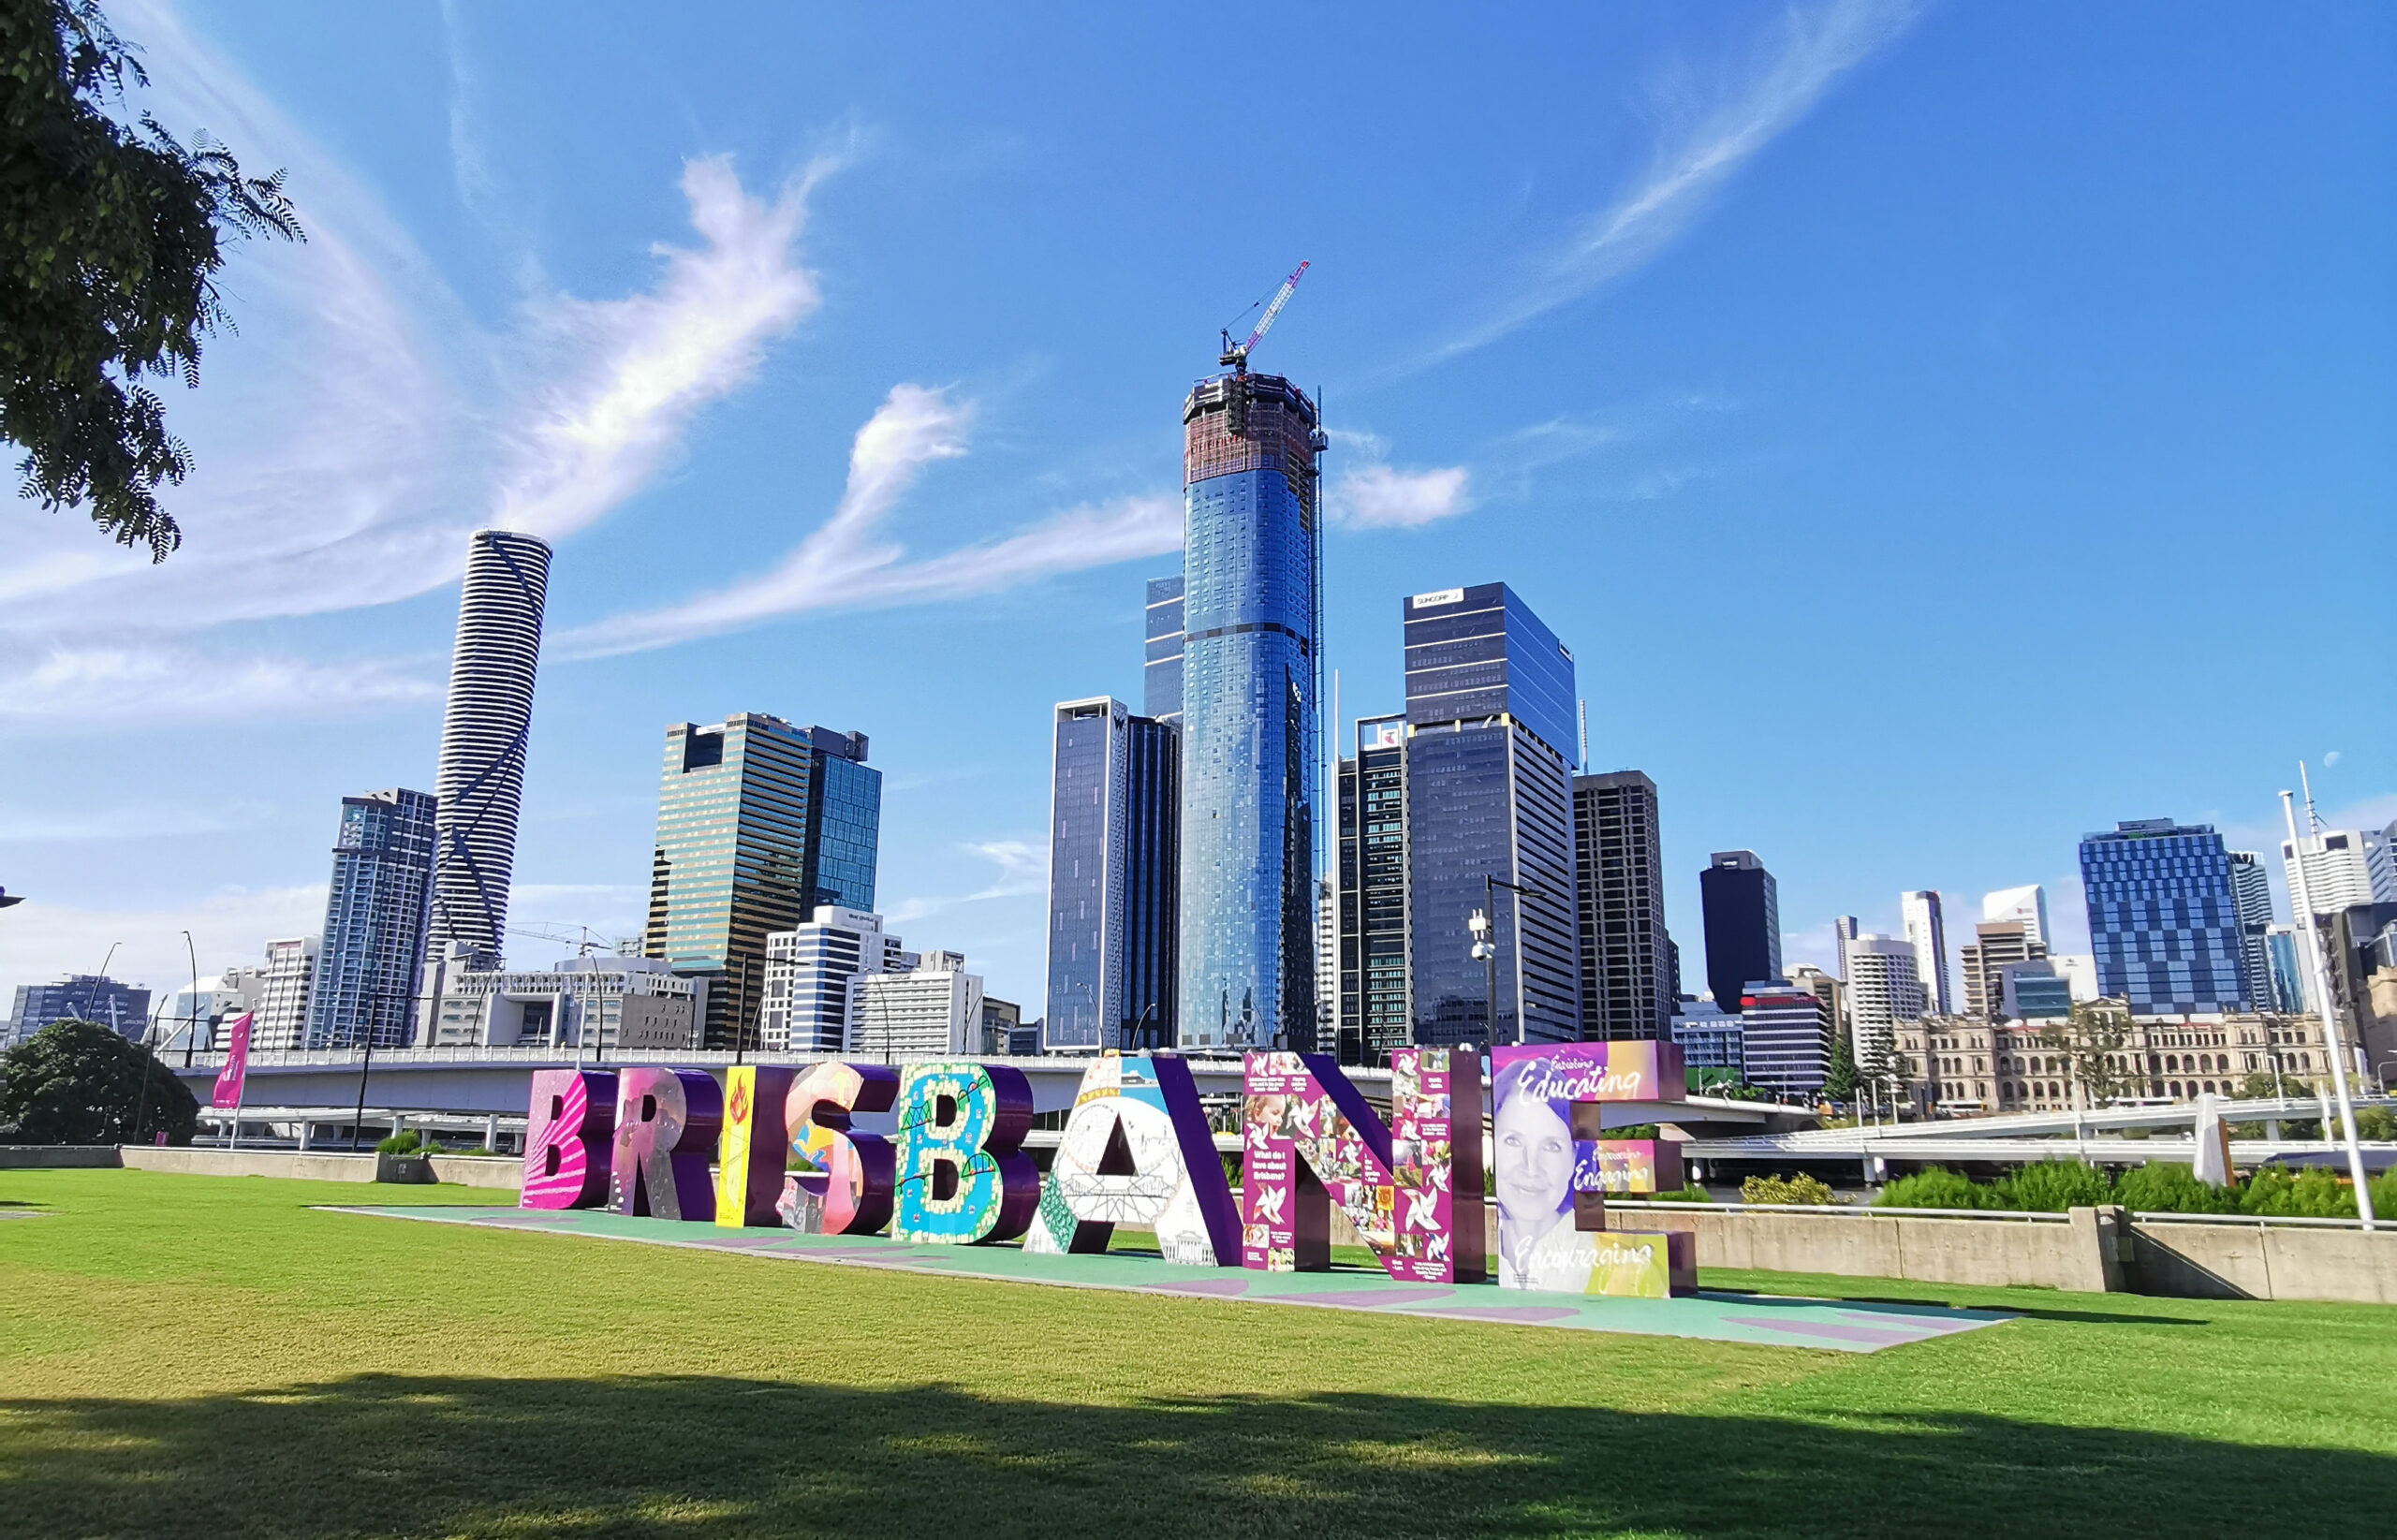 large 3D Brisbane sign sitting on lawn in front of river, with Brisbane city skyline in the background